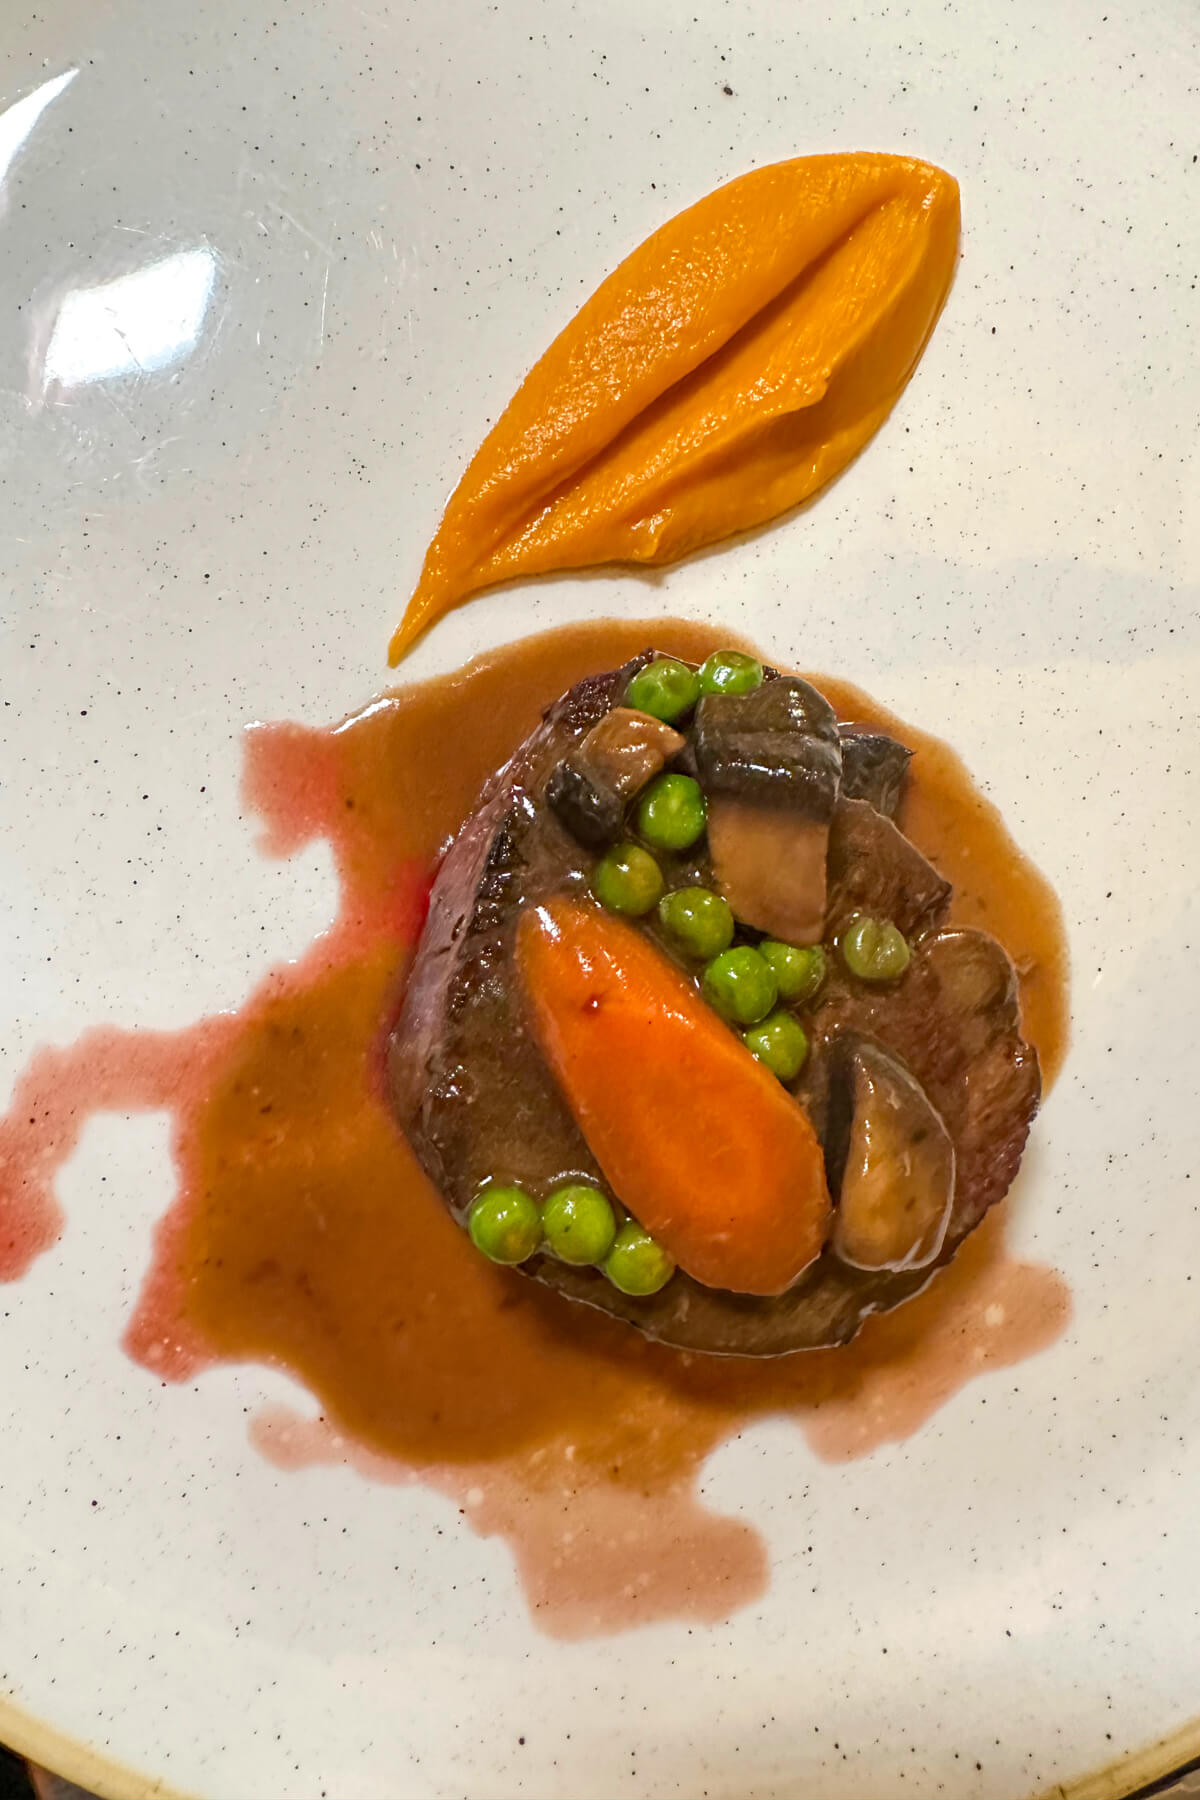 Overhead view of my filet mignon with peas, carrots, and a sweet potato puree